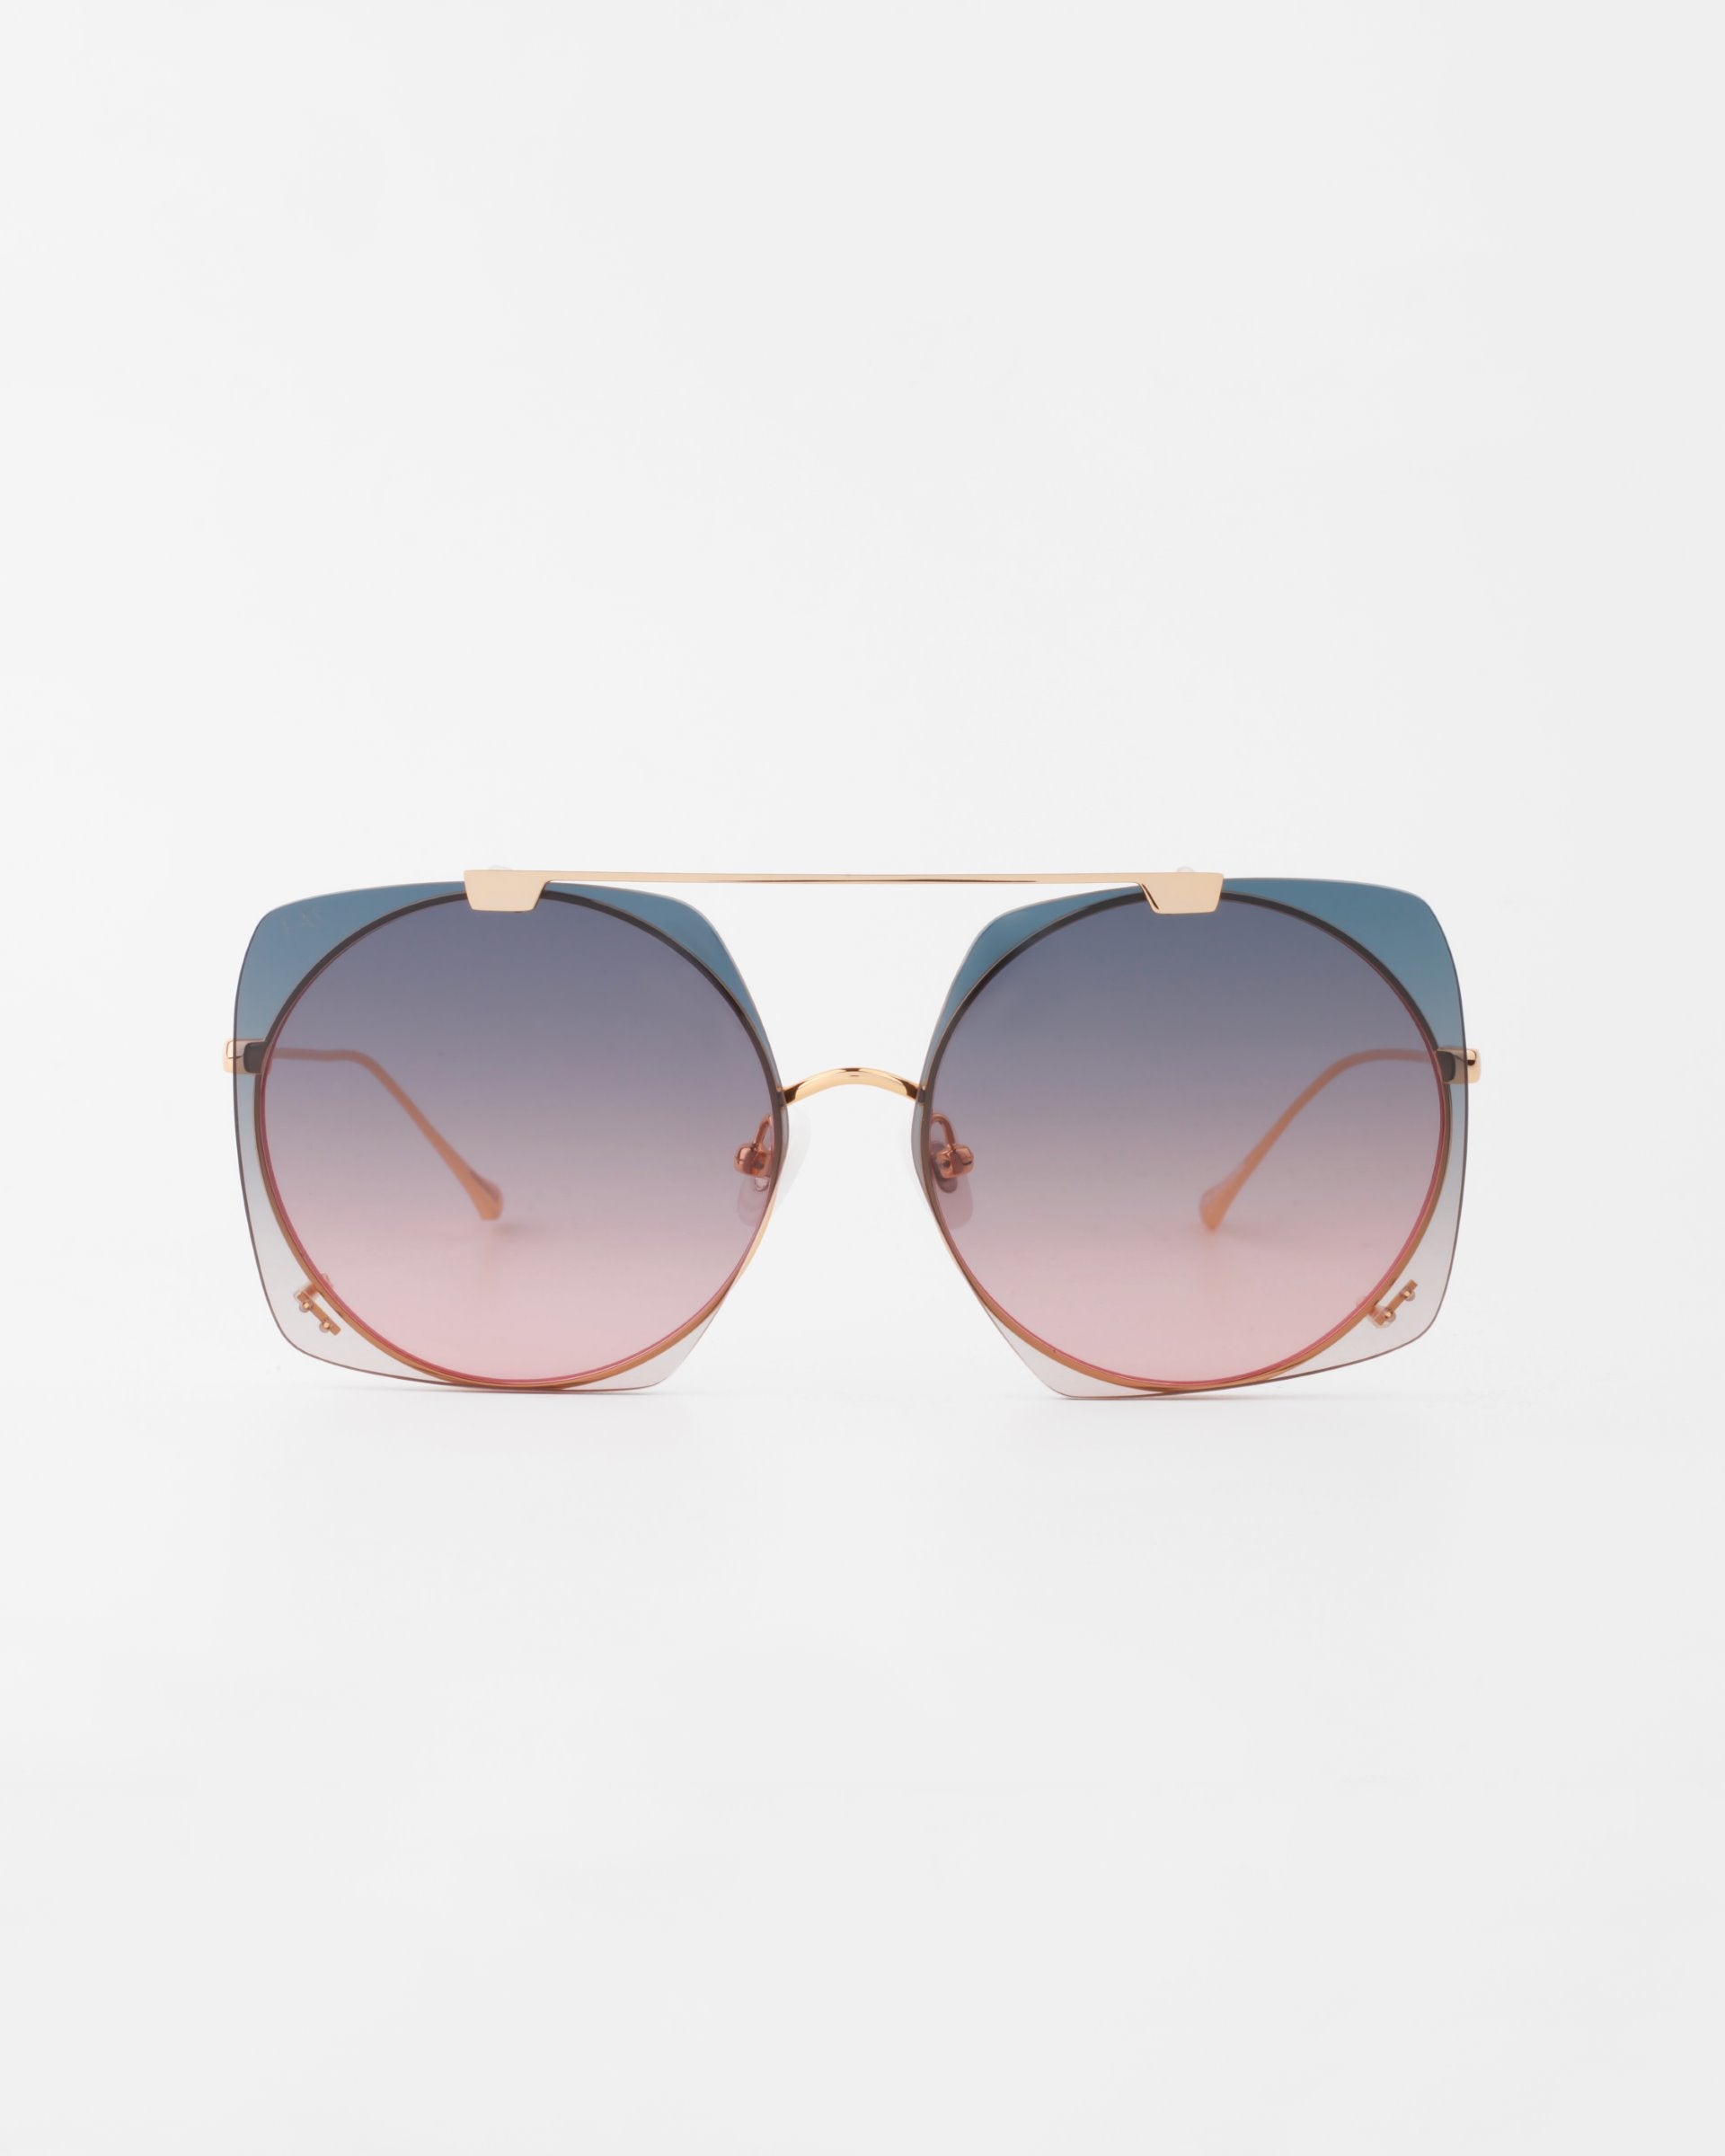 A pair of oversized, square-shaped Last Summer sunglasses by For Art&#39;s Sake® with gradient lenses, transitioning from dark blue at the top to light pink at the bottom. The glasses feature a thin, 18-karat gold-plated metal frame and a double bridge design, providing complete UVA &amp; UVB protection.